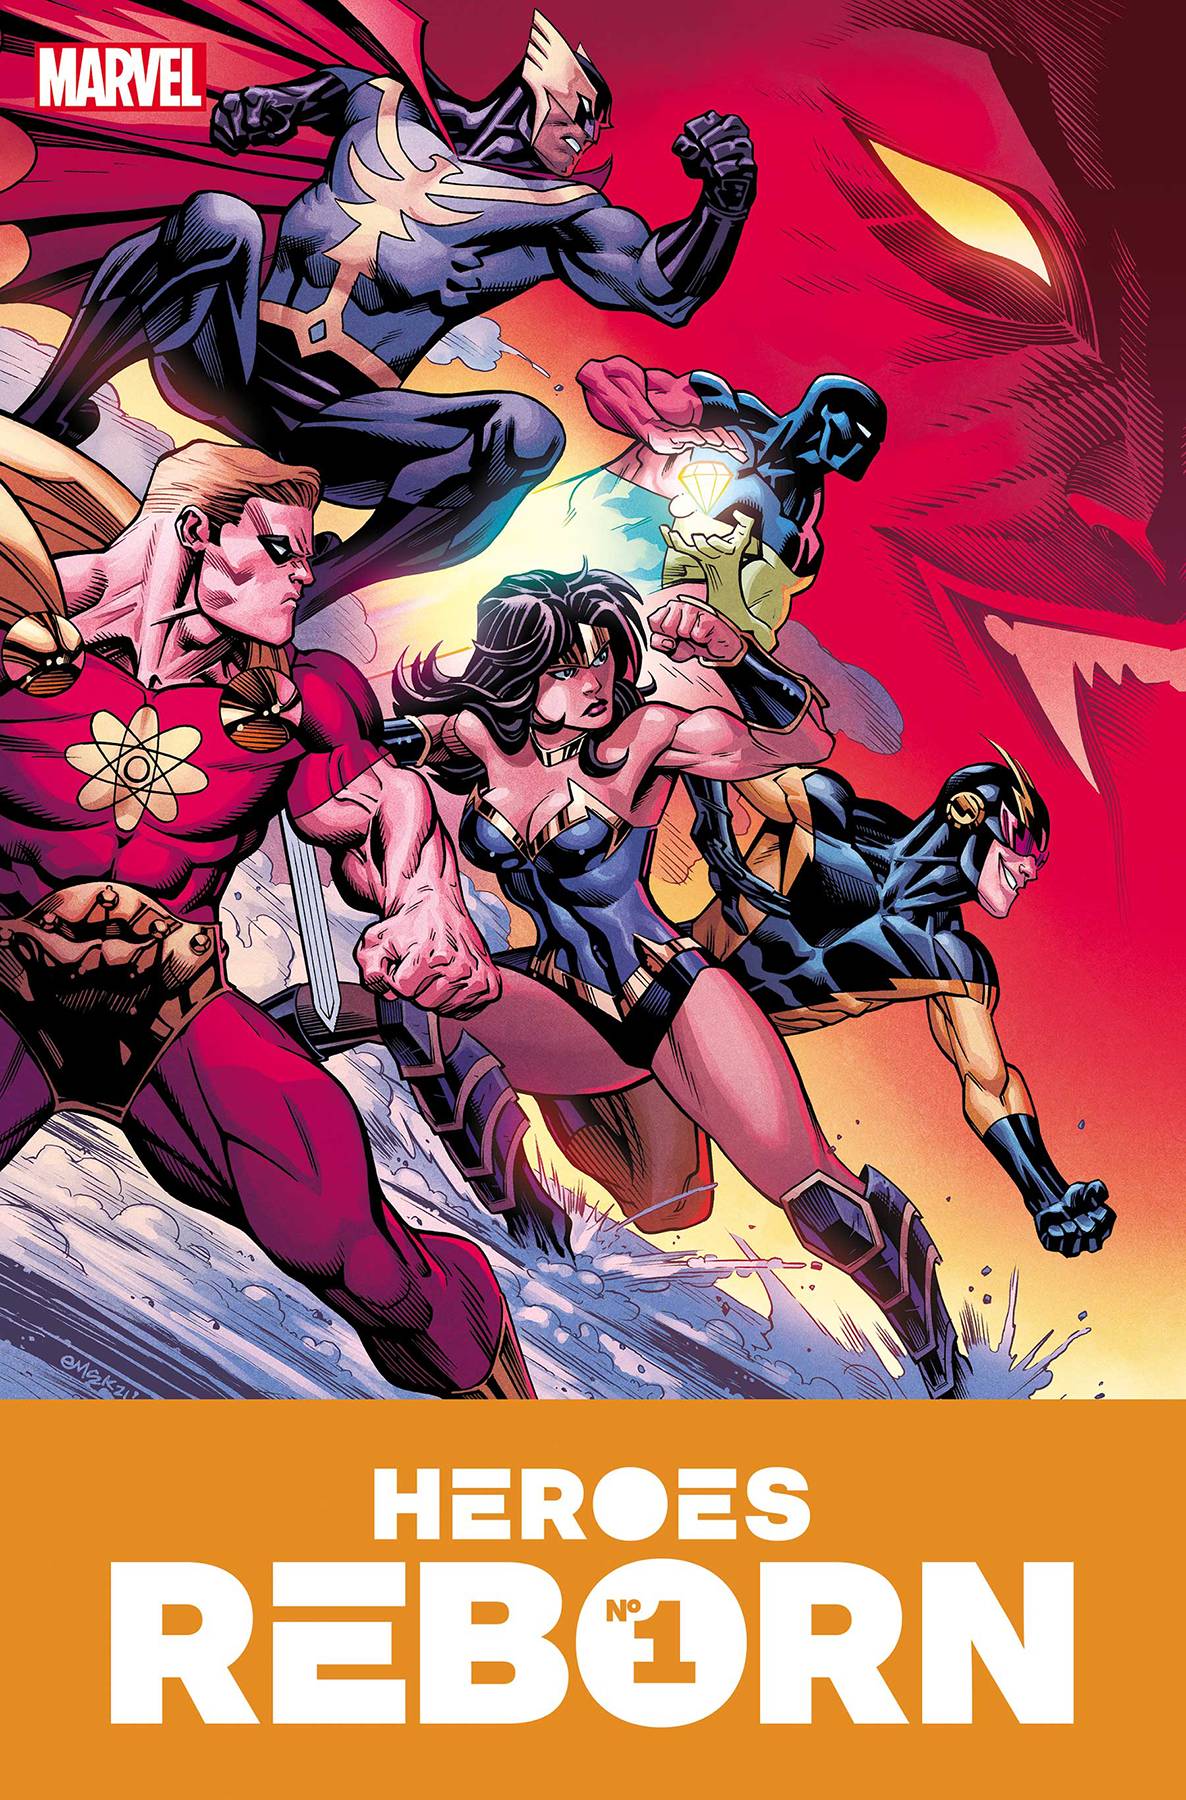 Heroes Reborn #1 (Of 7) Mcguinness Var (May 5 2021) - State of Comics